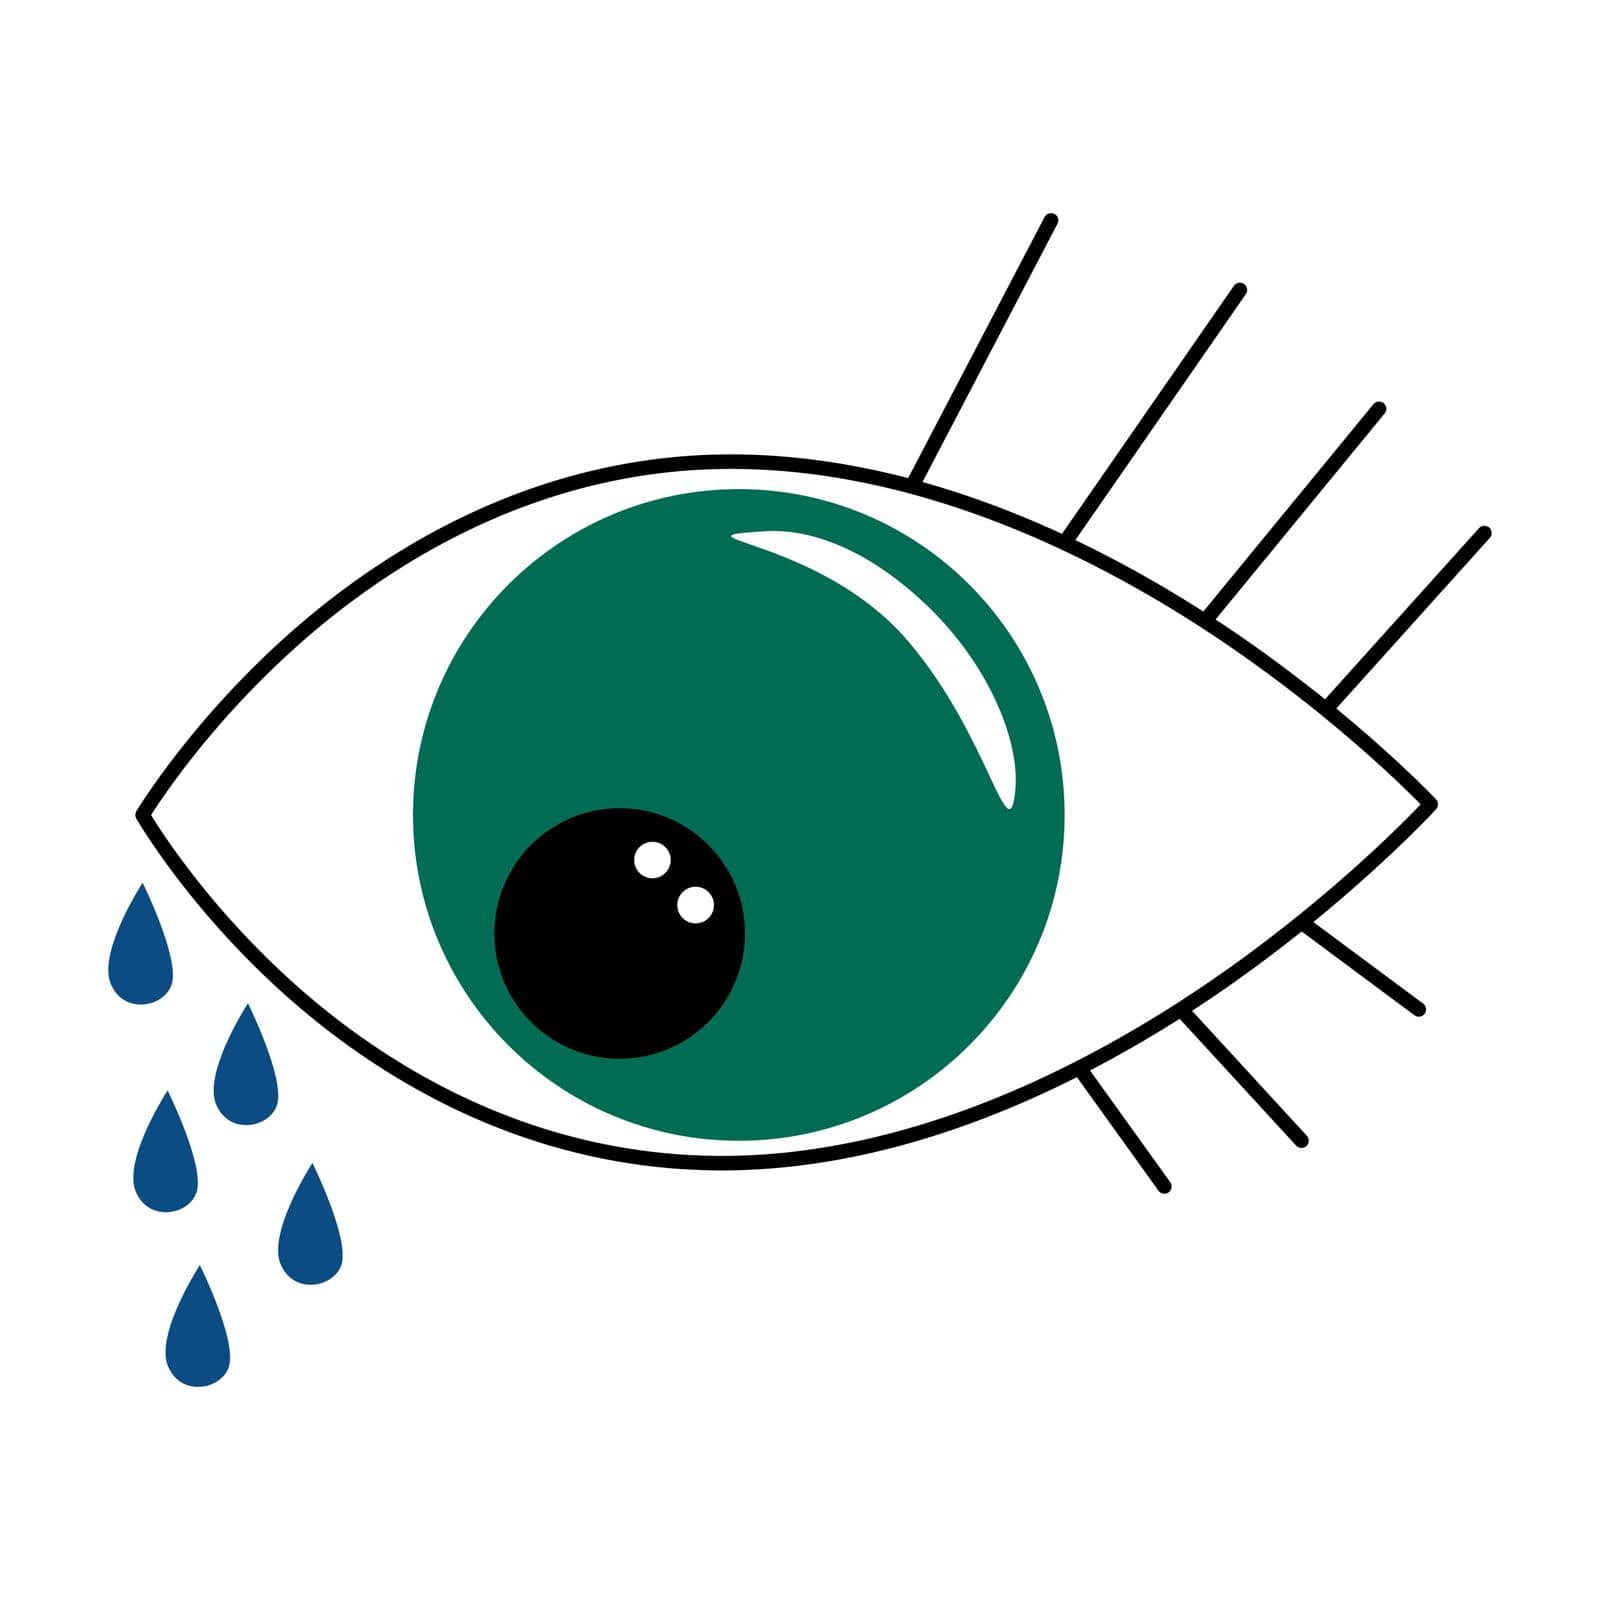 Eye with tears sign crying eye by KatyaBahr